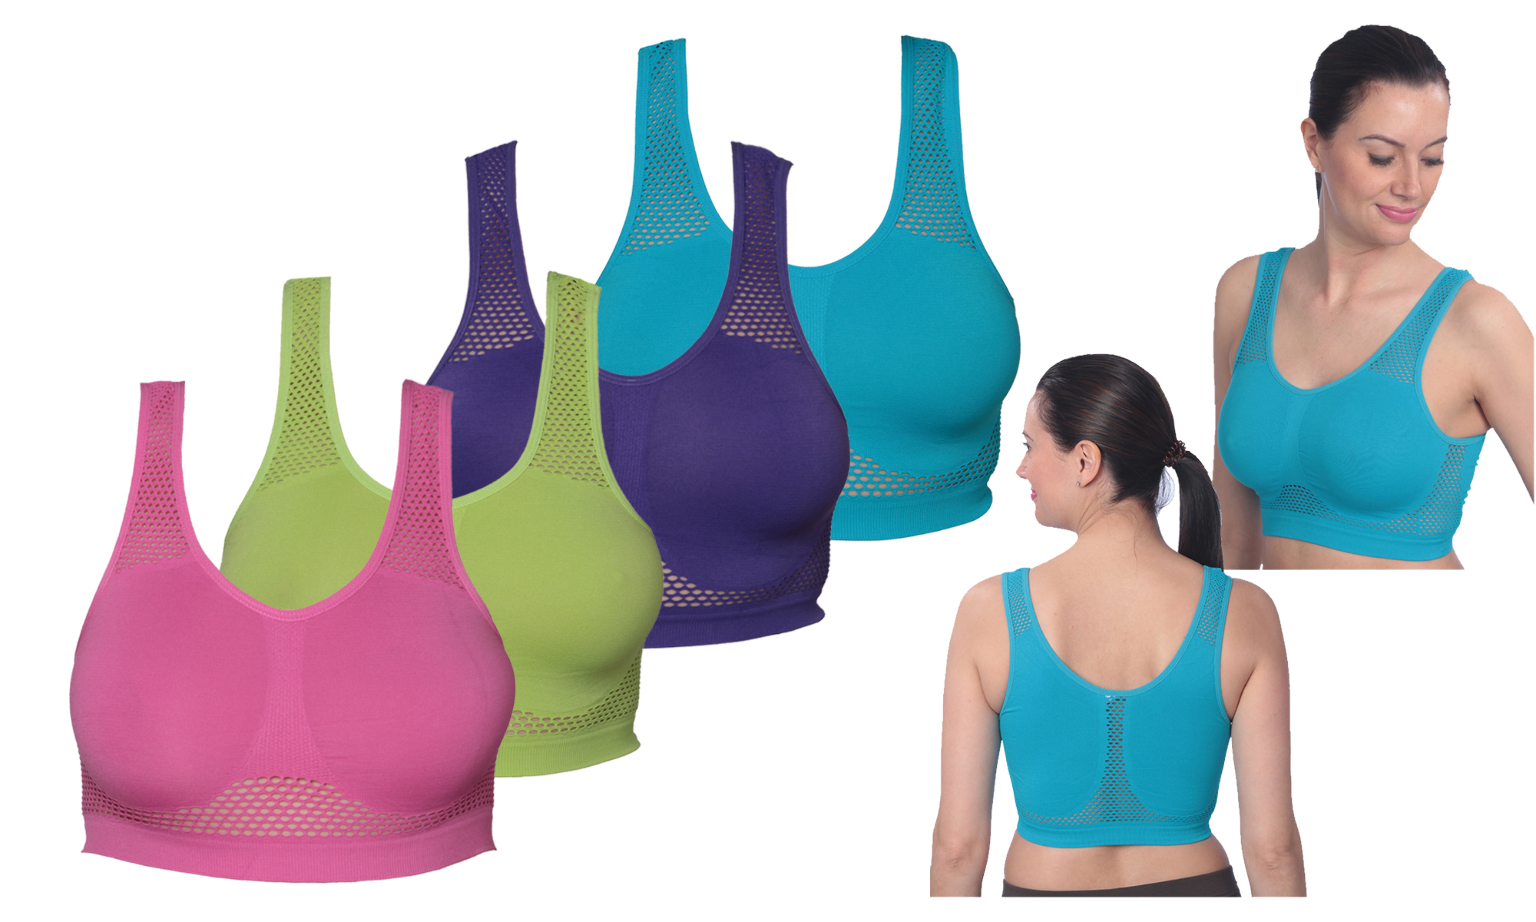 Women's Molded Sports Bras - Assorted Colors, Sizes M-XL